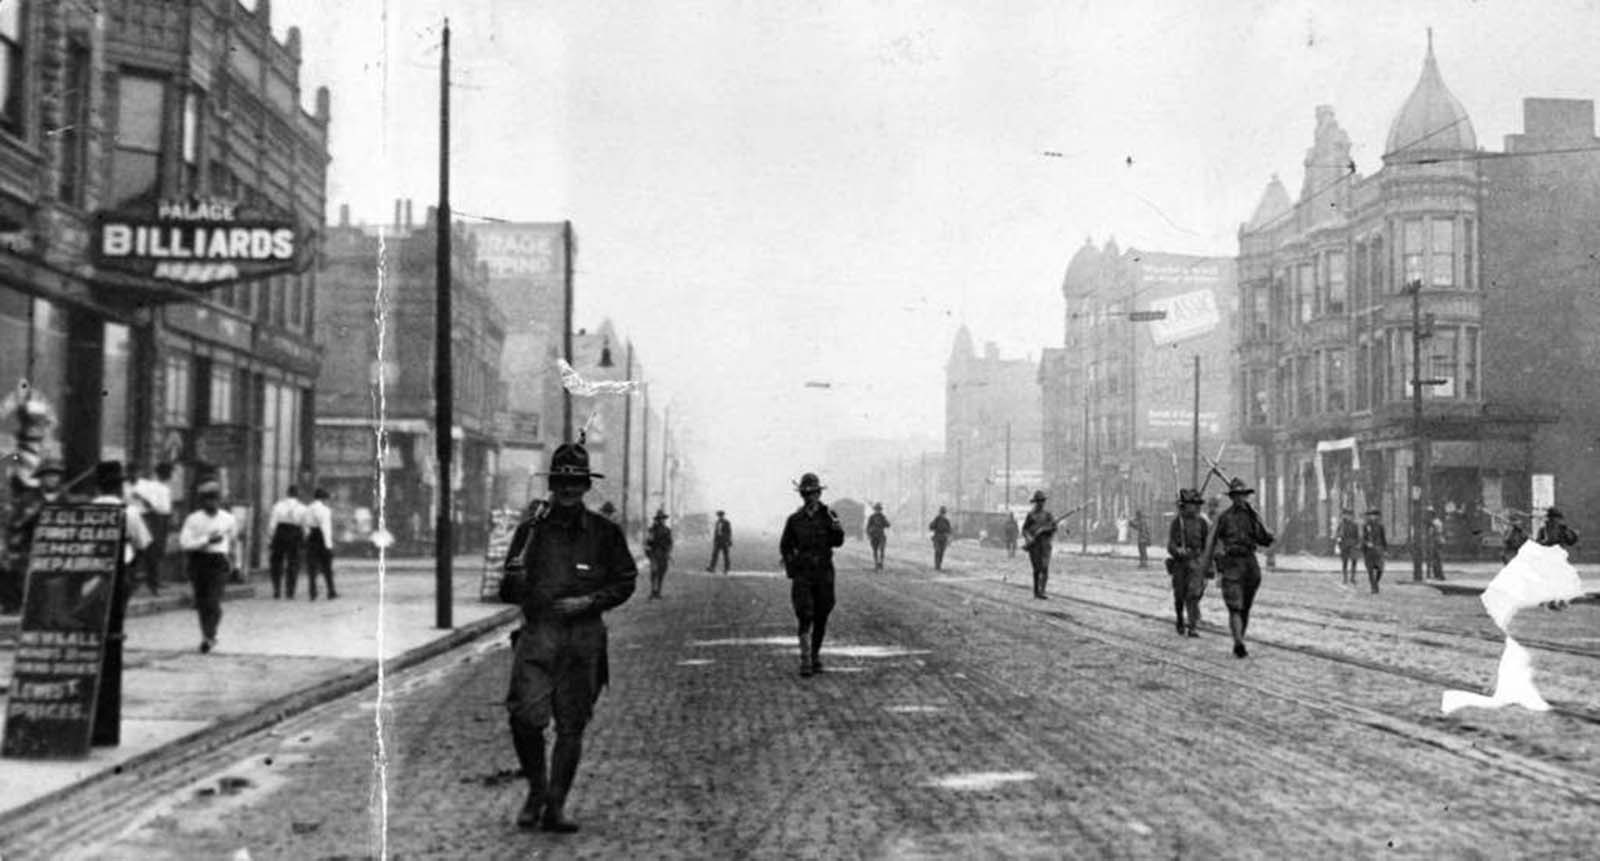 The state run militia patrols the streets of Chicago during the race riot of 1919. Photo dated Aug. 1, 1919.